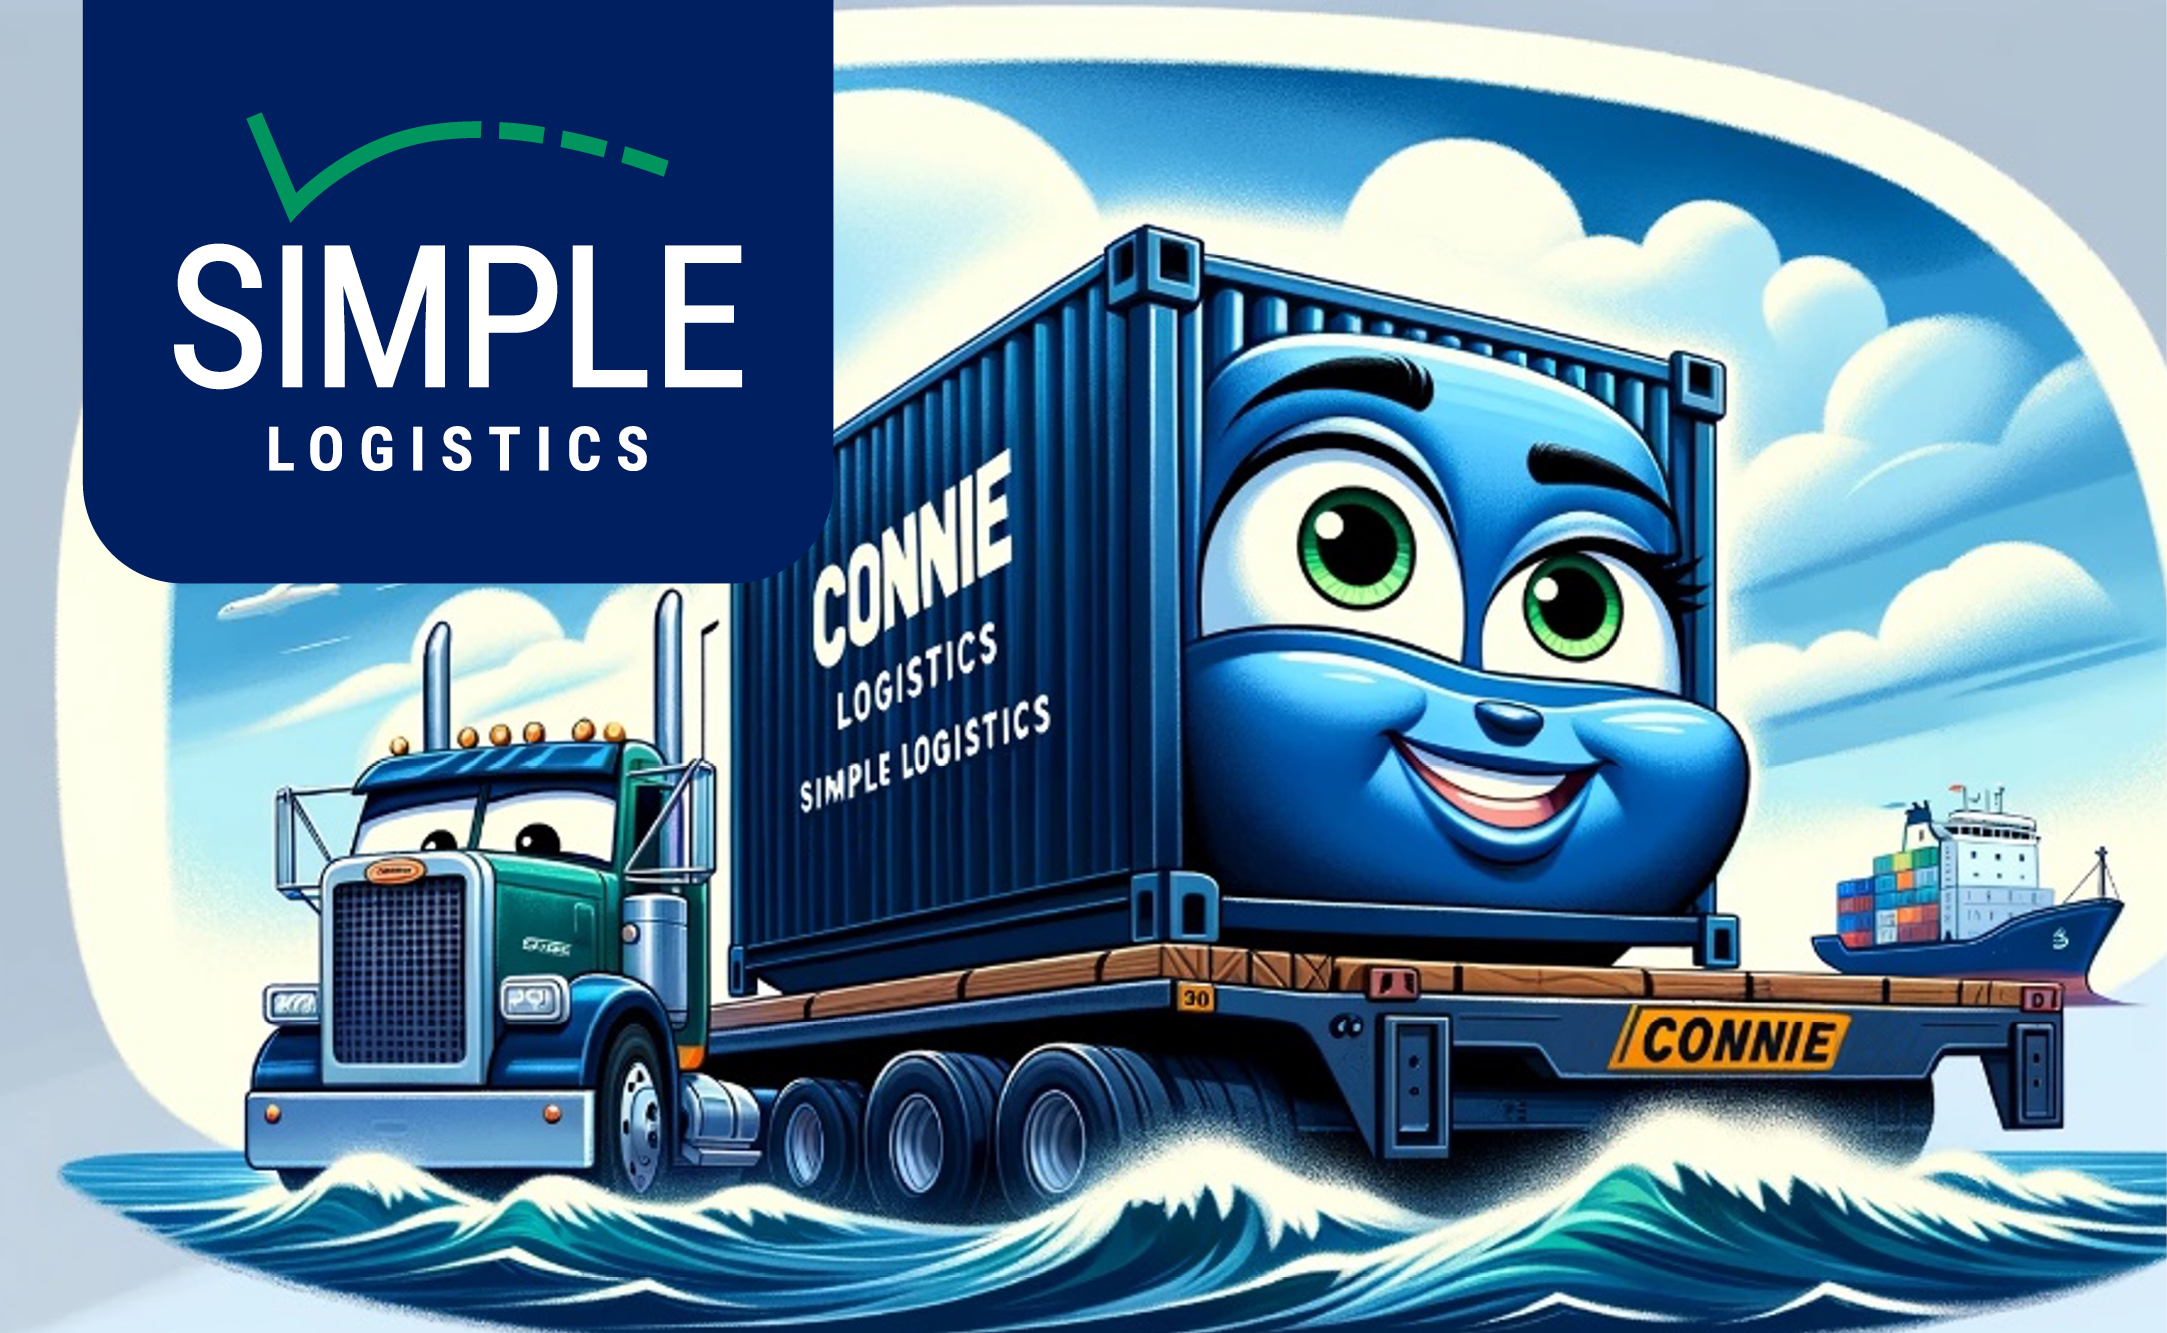 Cartoon graphic of Connie the Container with Simple Logistics logo in top left corner